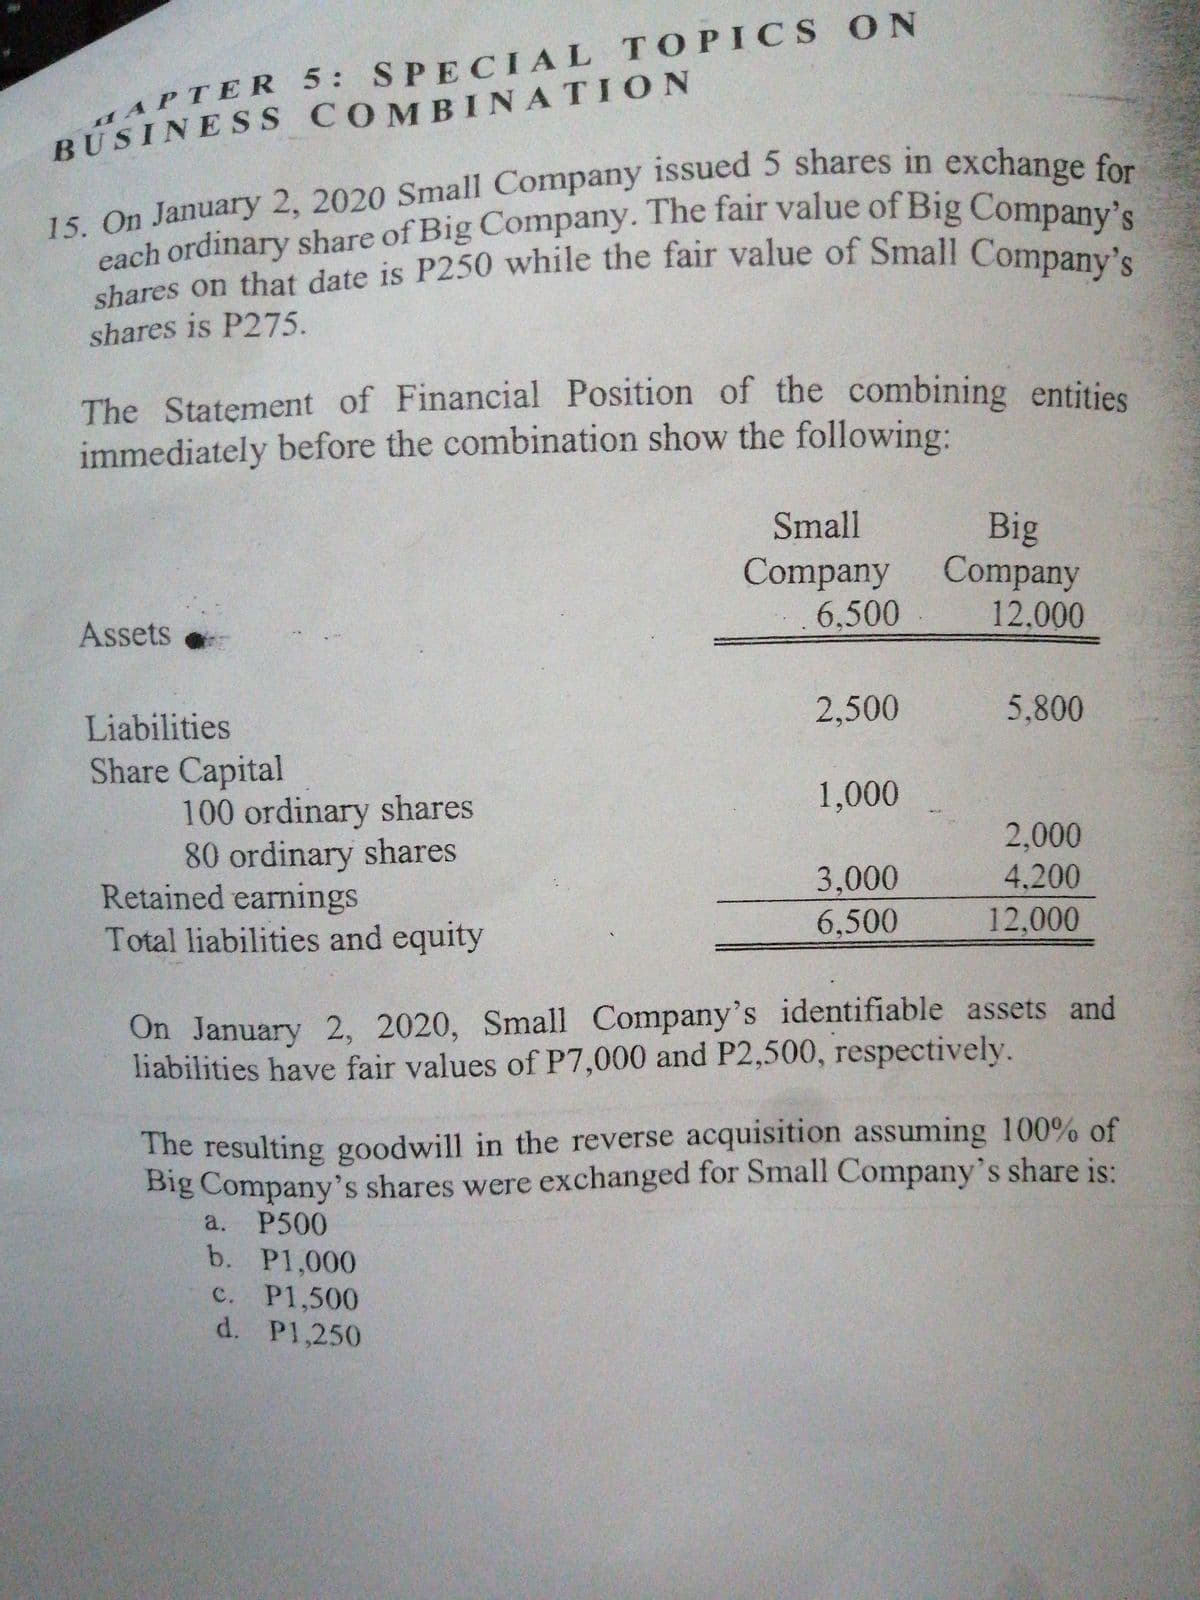 APTER 5: SPECIAL TOPICS ON
15. On January 2, 2020 Small Company issued 5 shares in exchangee
each ordinary share of Big Company. The fair value of Big Company's
shares is P275.
The Statement of Financial Position of the combining entities
immediately before the combination show the following:
Big
Company
12,000
Small
Company
6,500
Assets
2,500
5,800
Liabilities
Share Capital
100 ordinary shares
80 ordinary shares
Retained earnings
Total liabilities and equity
1,000
2,000
3,000
4,200
6,500
12,000
On January 2, 2020, Small Company's identifiable assets and
liabilities have fair values of P7,000 and P2,500, respectively.
The resulting goodwill in the reverse acquisition assuming 100% of
Big Company's shares were exchanged for Small Company's share is:
a. P500
b. P1,000
с. Р1,500
d. P1,250
